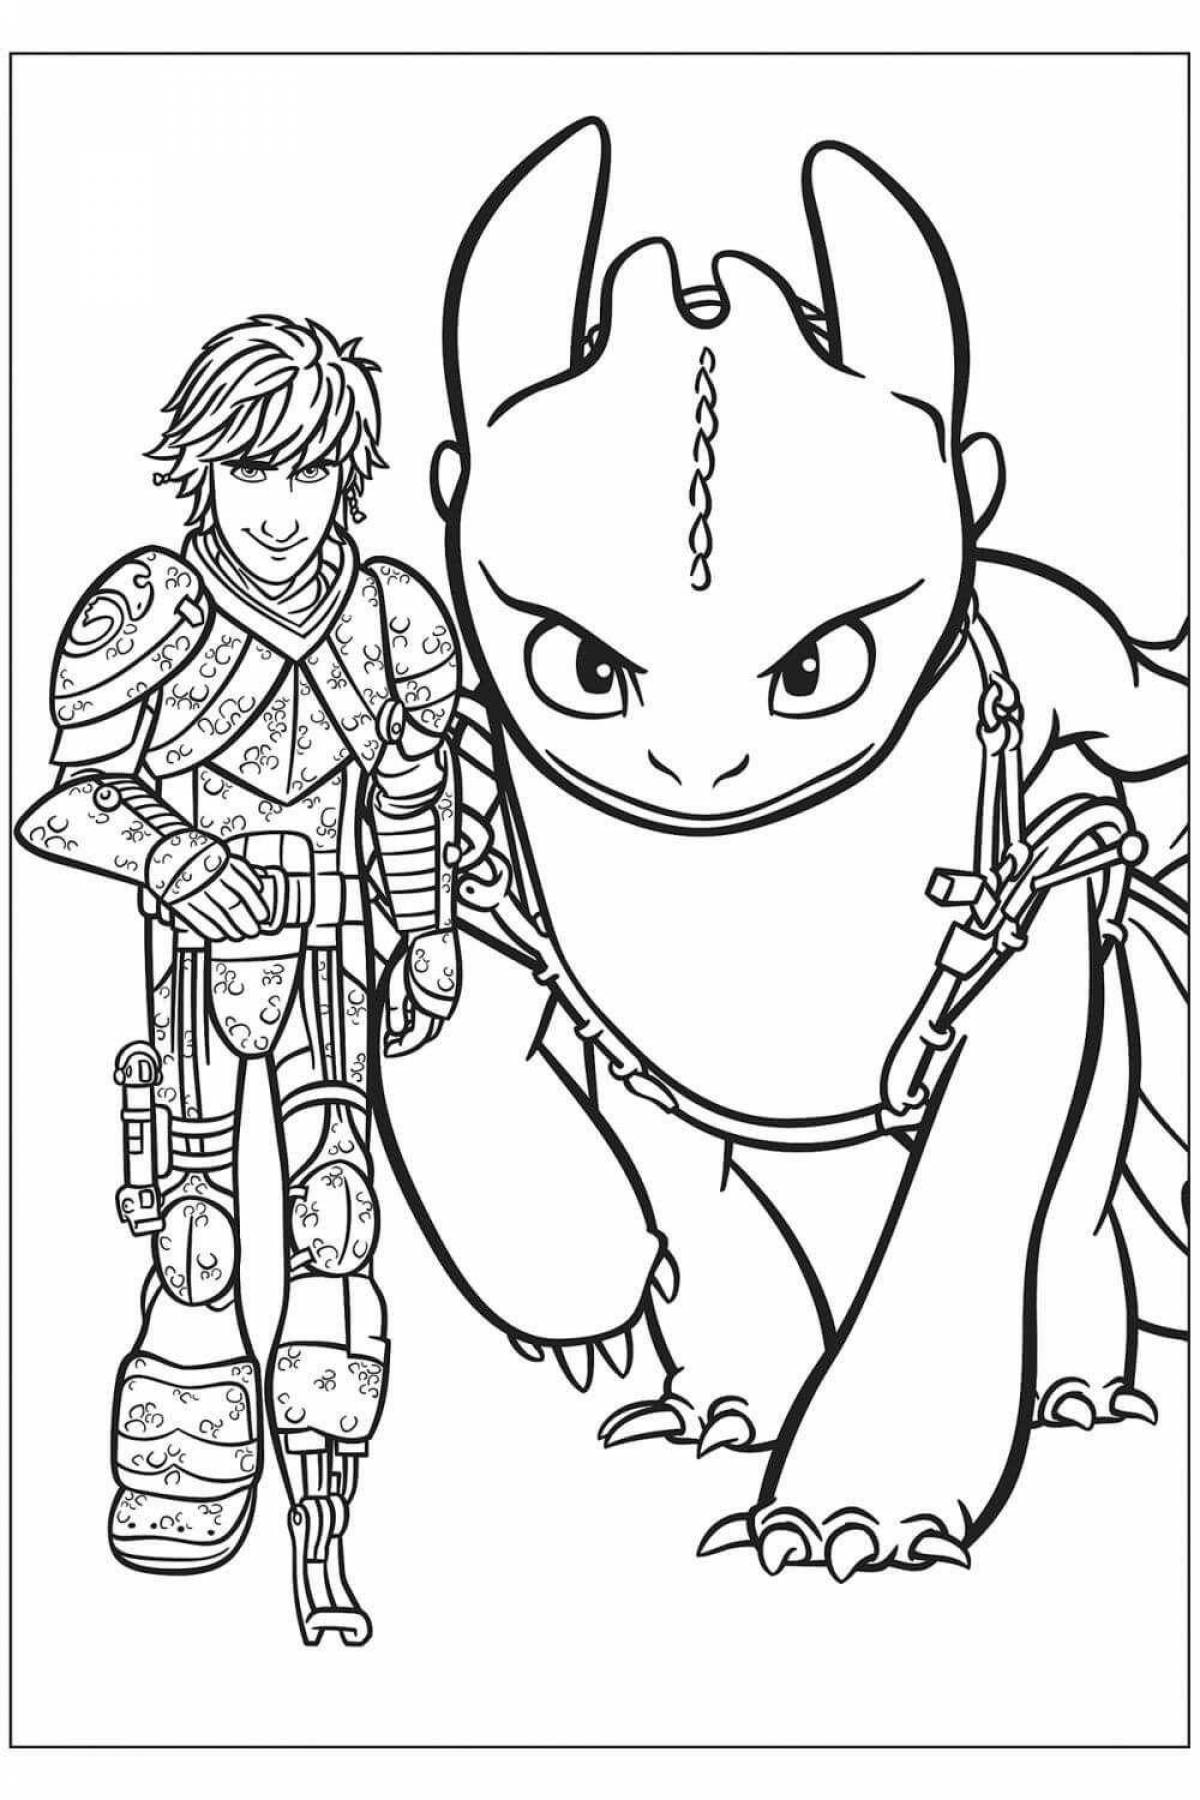 How to train your dragon 3 flawless coloring book